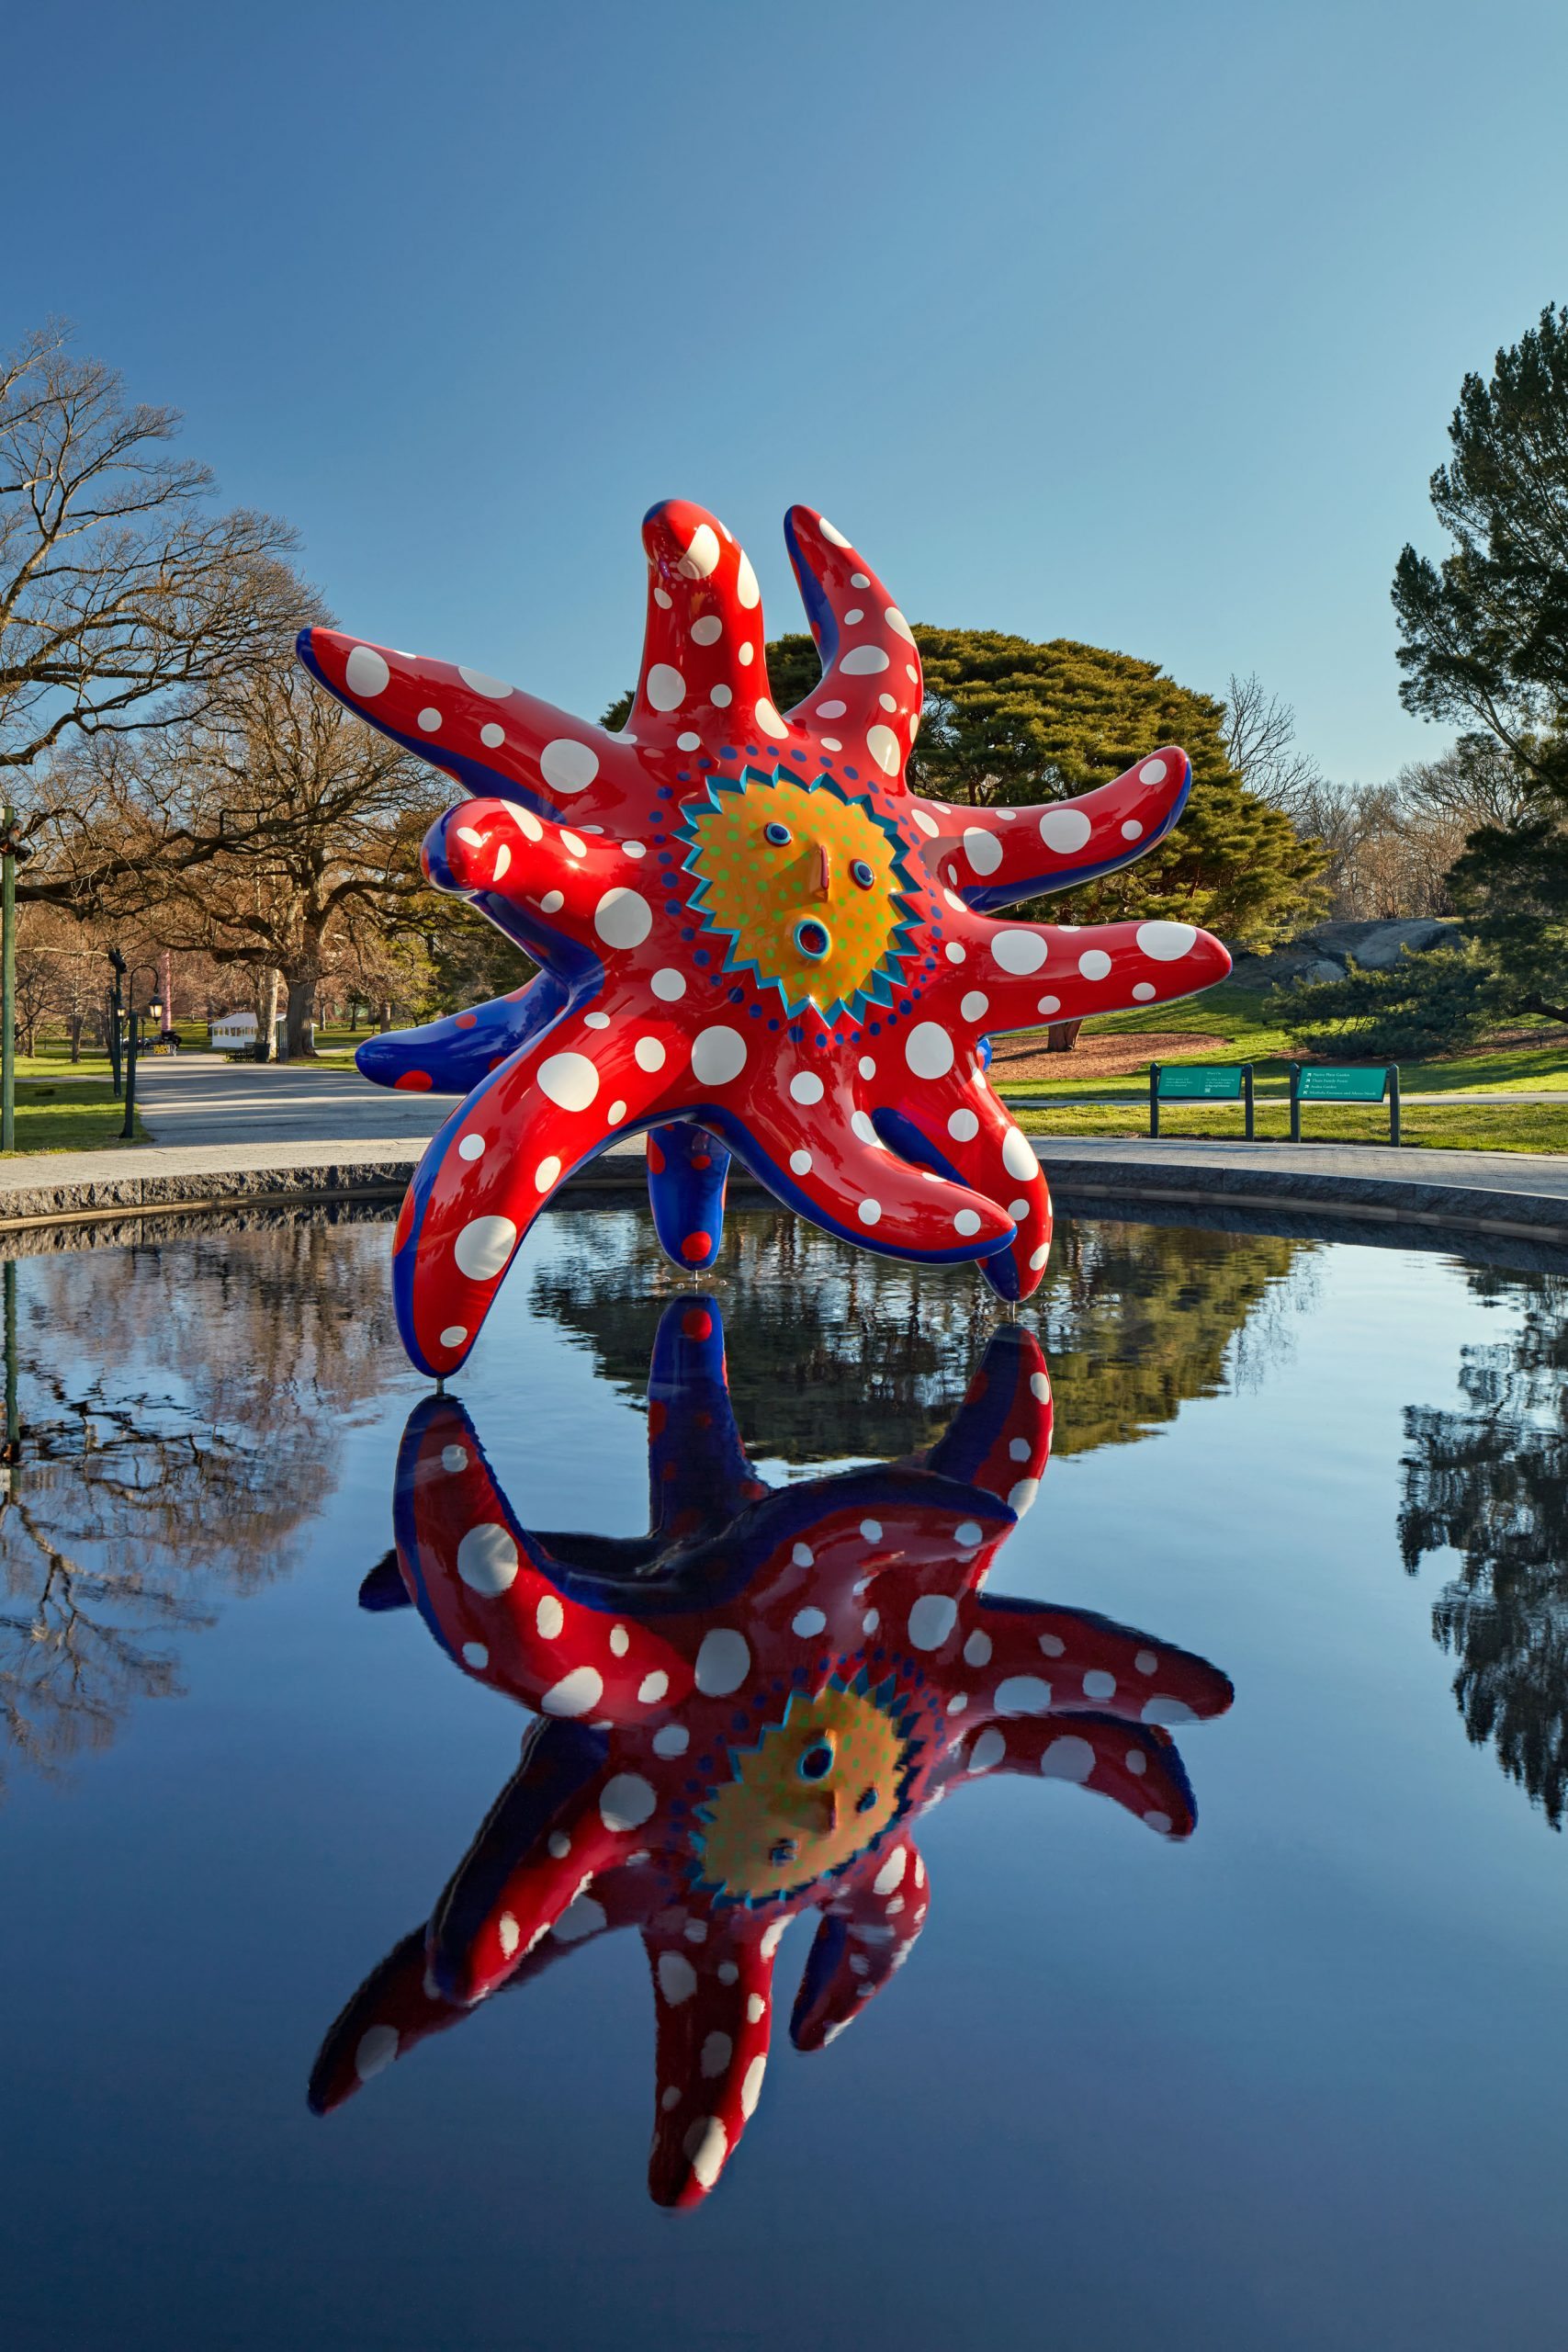 Yayoi Kusama, “I Want to Fly to the Universe”, 2020, The New York Botanical Garden, Urethane paint on aluminum, 157 3/8 x 169 3/8 x 140 1/8 in. (400 x 430 x 356 cm), Collection of the artist. Courtesy of Ota Fine Arts and David Zwirner. Photo by Robert Benson Photography